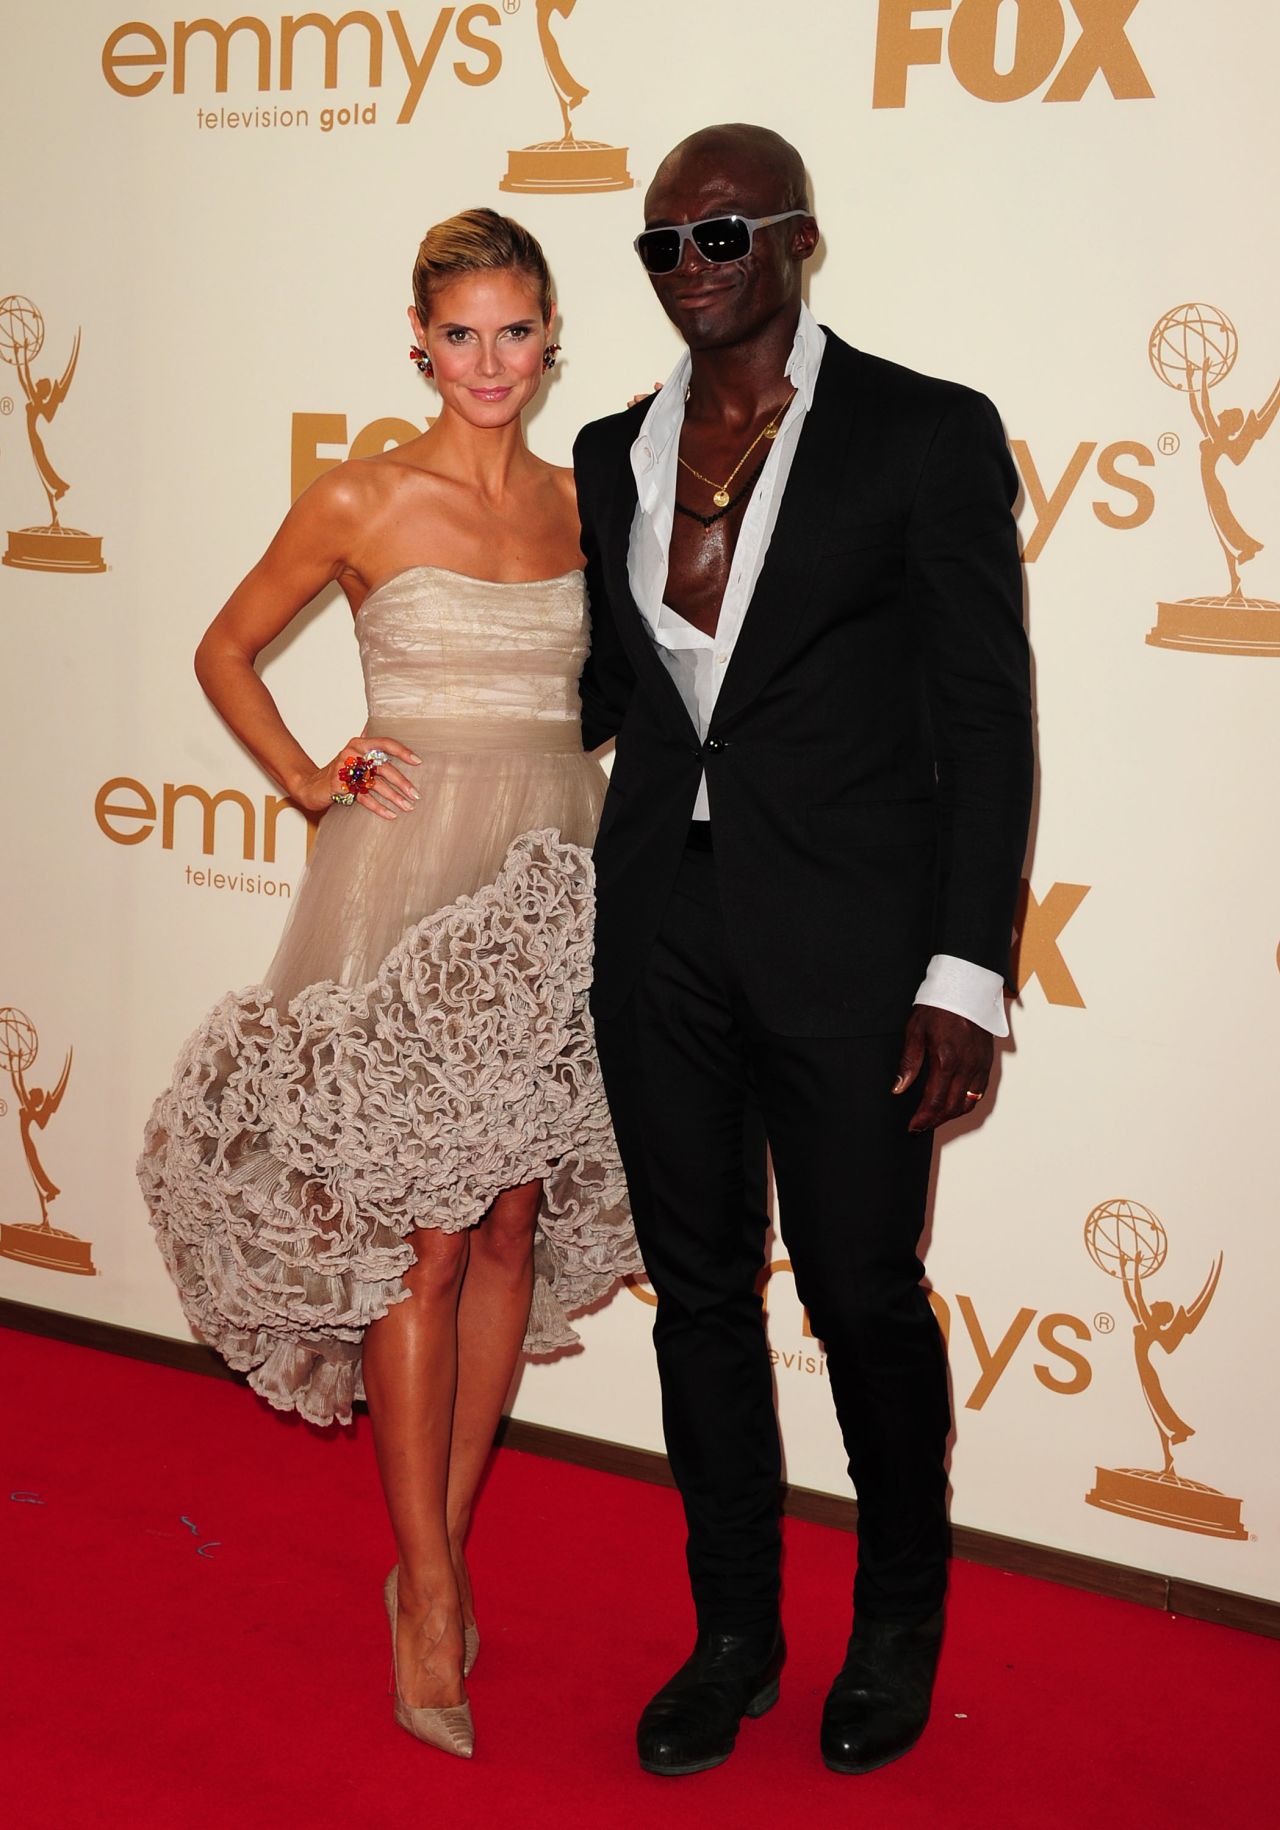 In 2005, singer Seal proposed to supermodel Heidi Klum atop a glacier in Whistler, a ski resort town in the western Canadian province of British Columbia. <a href="http://www.people.com/people/article/0,,1013954,00.html" target="_blank" target="_blank"> She called it "a once-in-a-lifetime event." </a>The couple split in 2012.